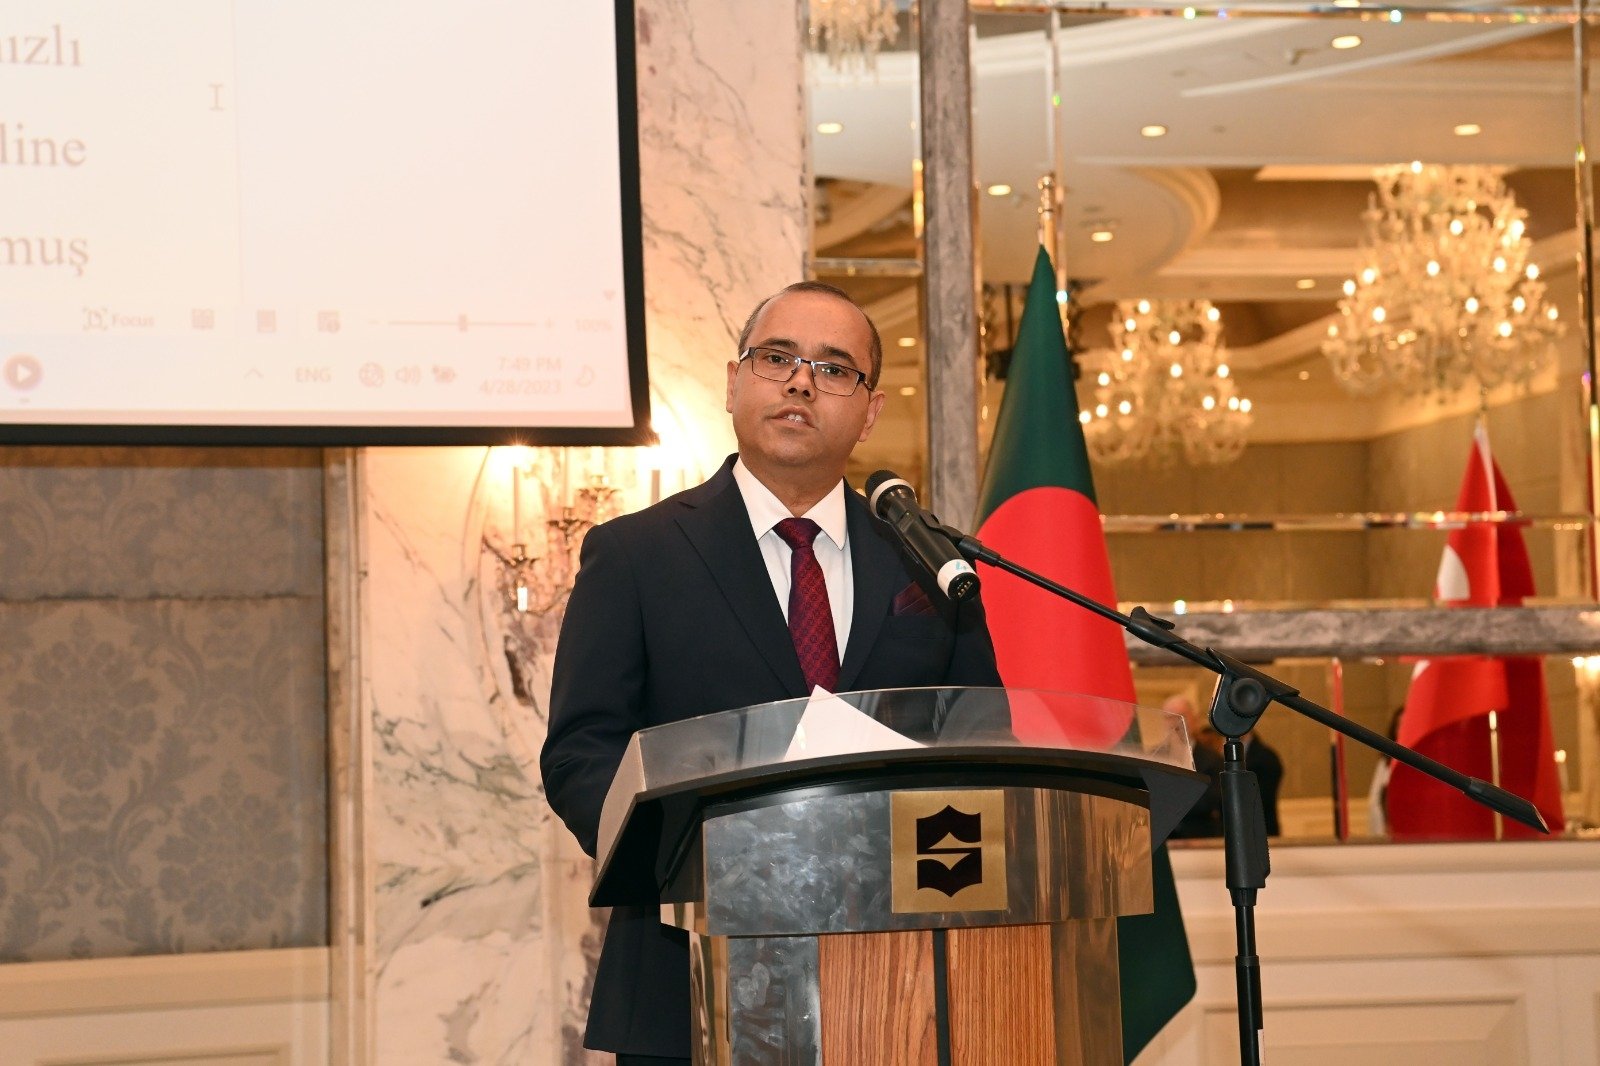 Bangladesh Consul General Mohammed Nore-Alam speaks during the event, Istanbul, Türkiye, April 28, 2023. (Photo by Mohammad Zakir Hossain)